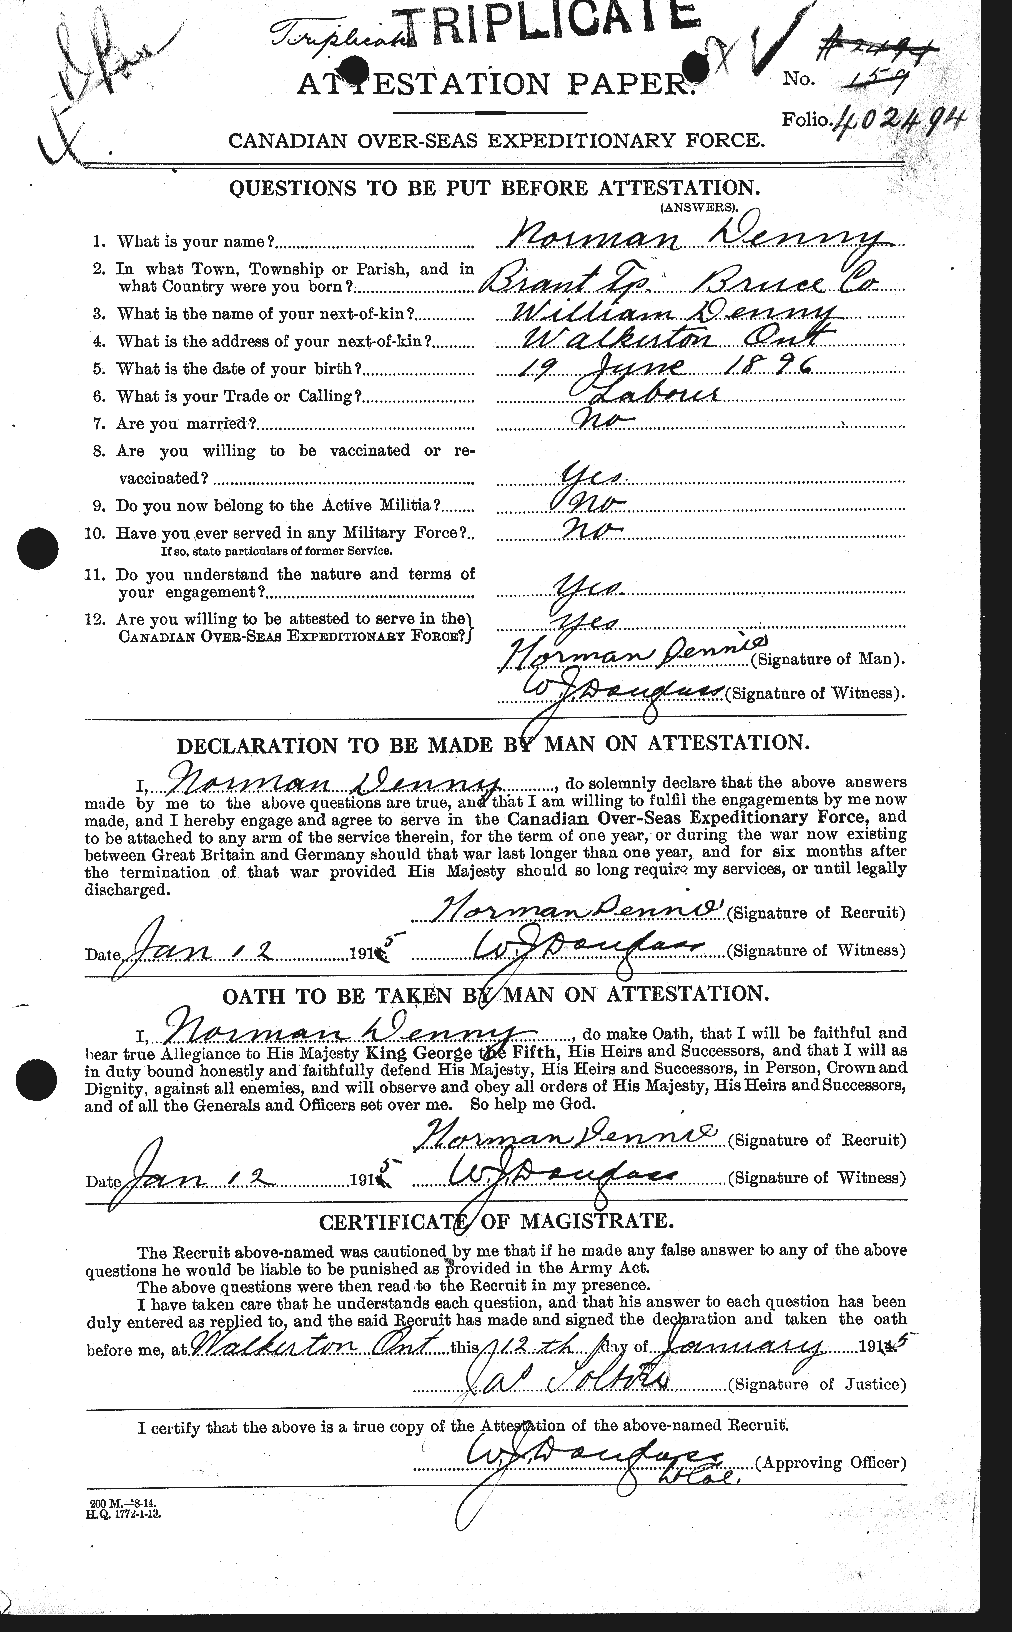 Personnel Records of the First World War - CEF 286372a